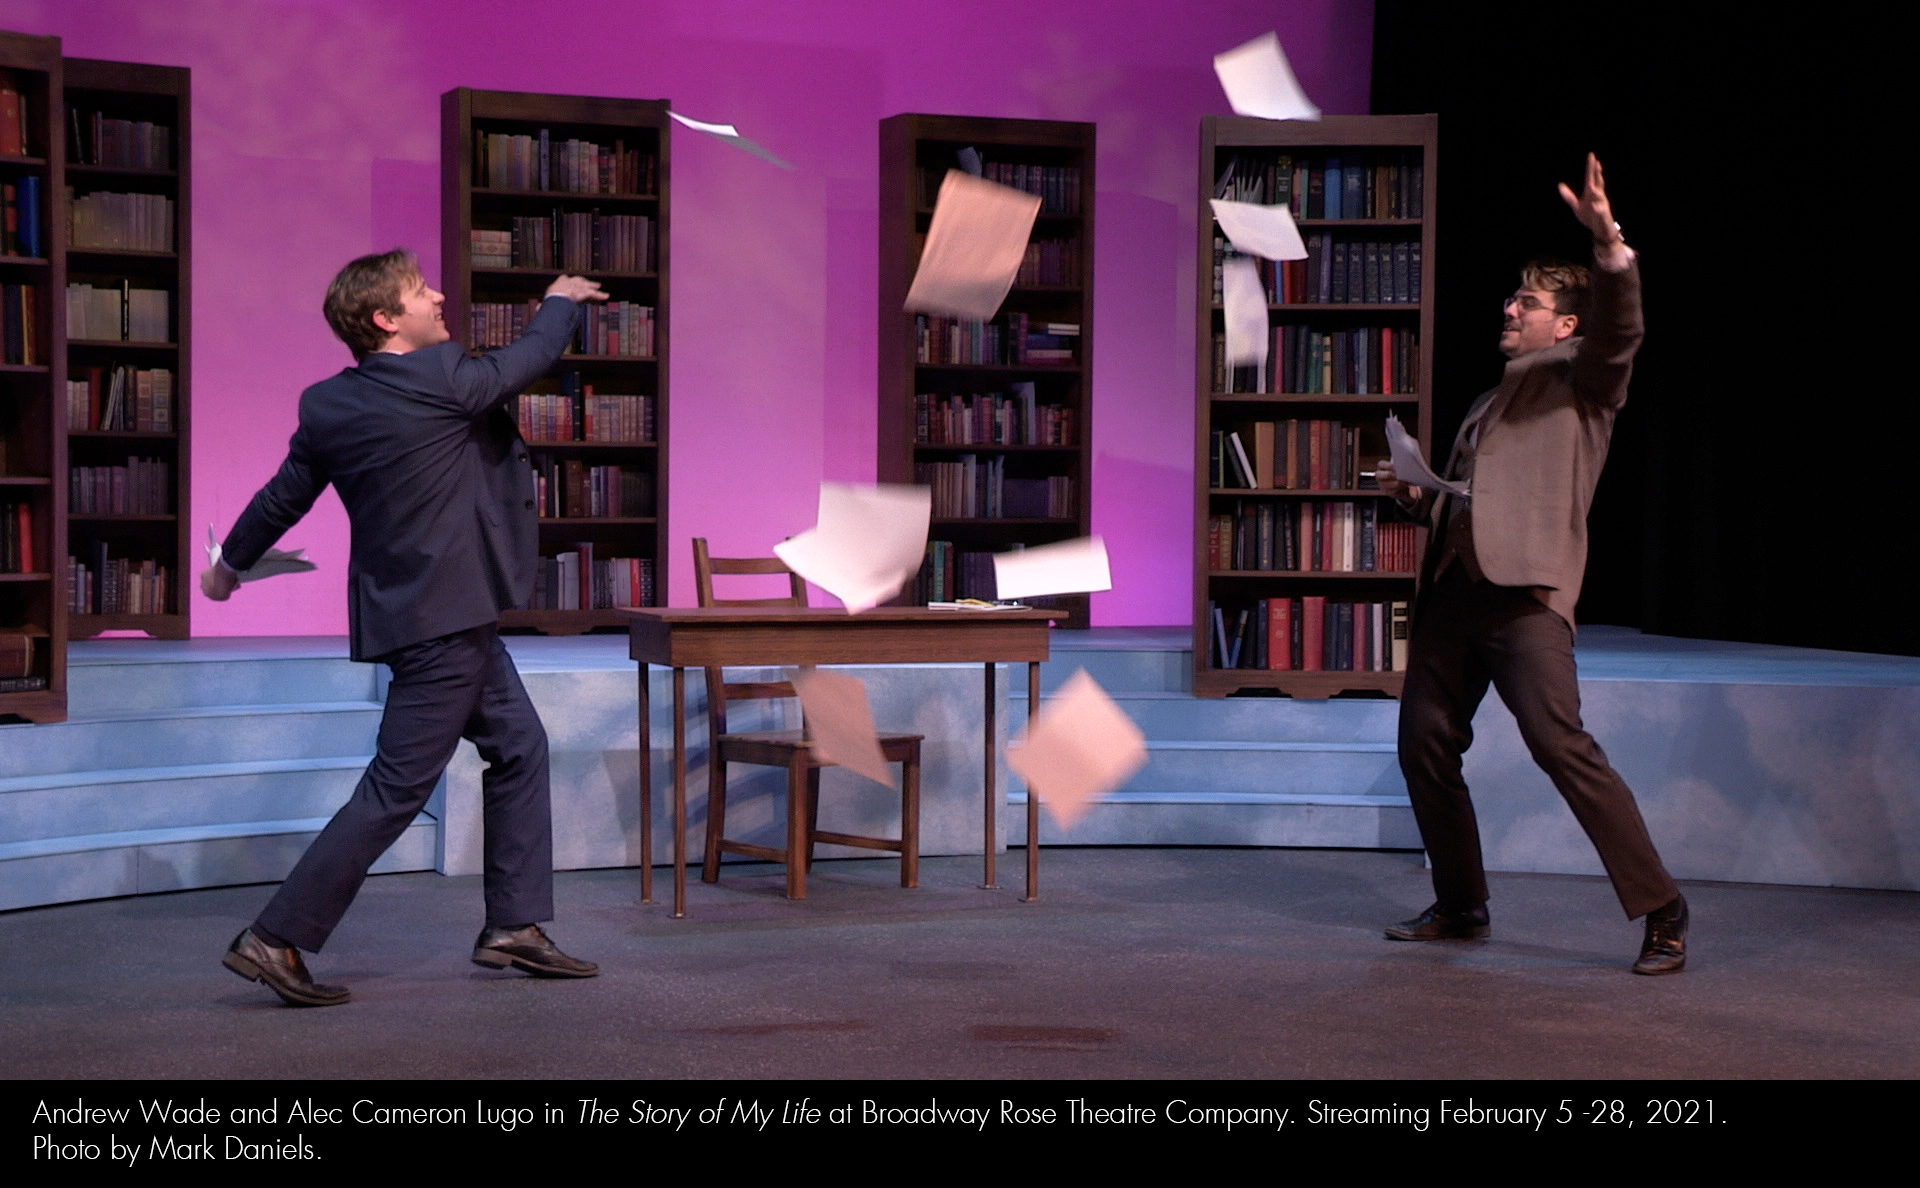 Production photo of Alec Cameron Lugo and Andrew Wade in 